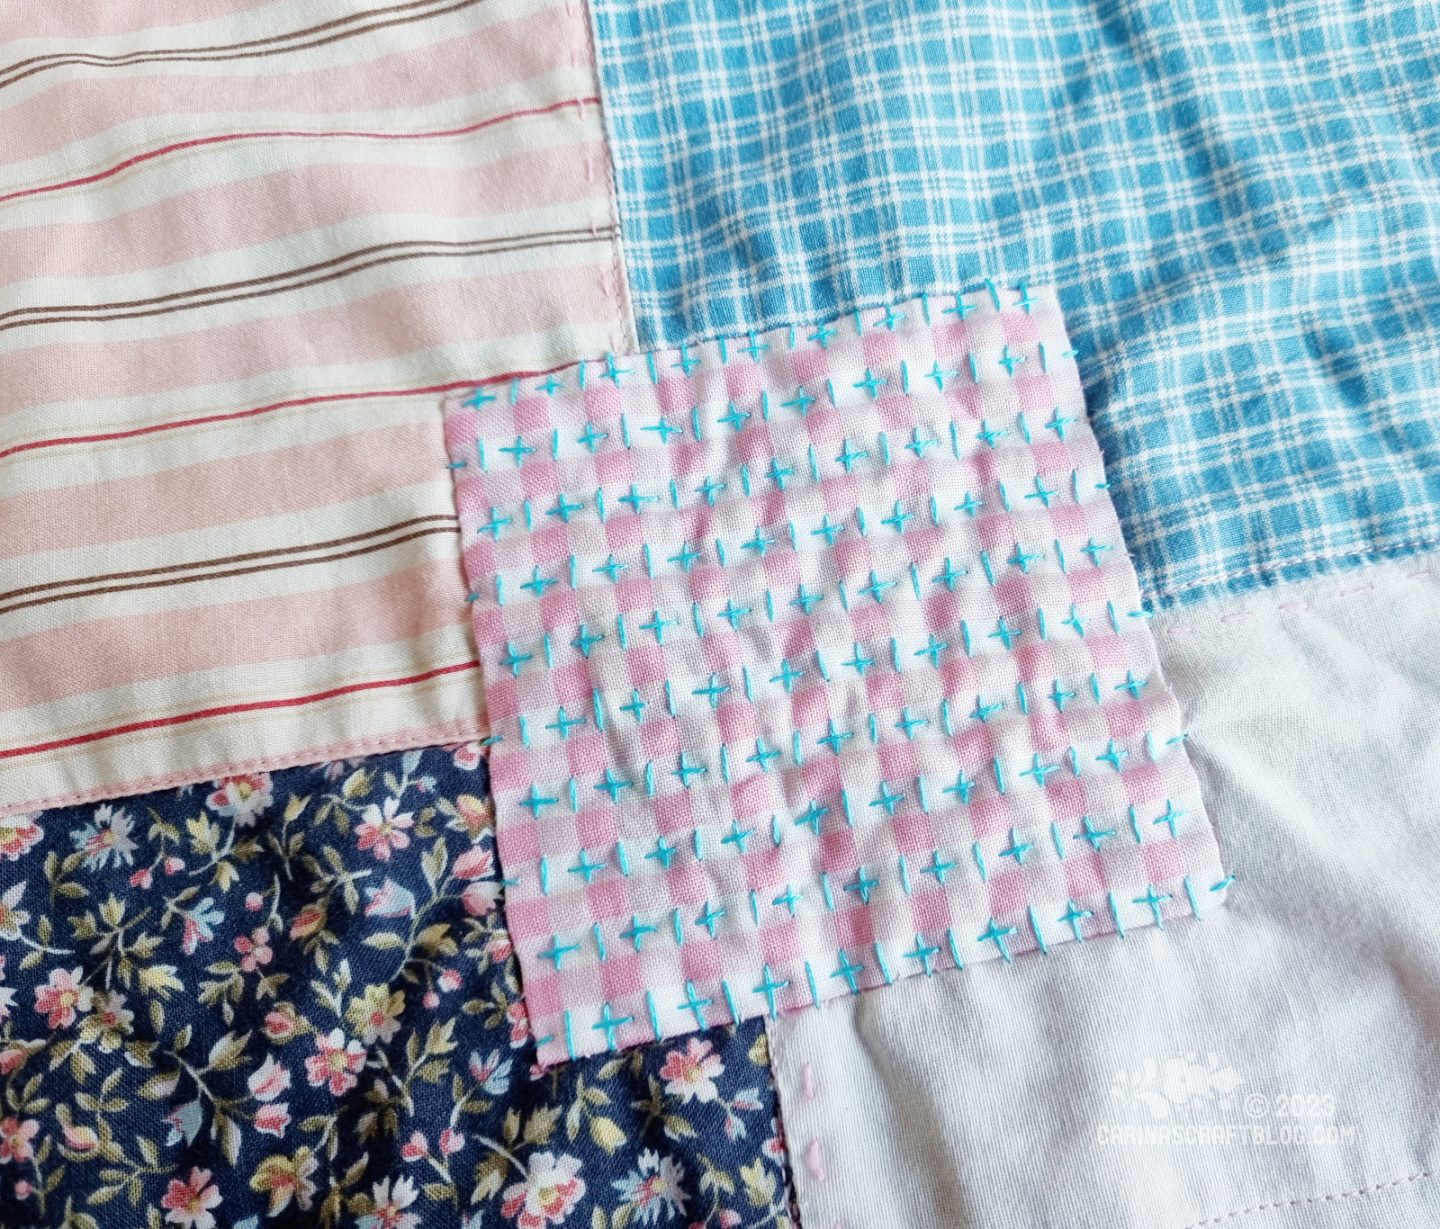 Close view of a mended patch in a pink and white check pattern on a patchwork blanket. Blue hand stitches on top of the patch.